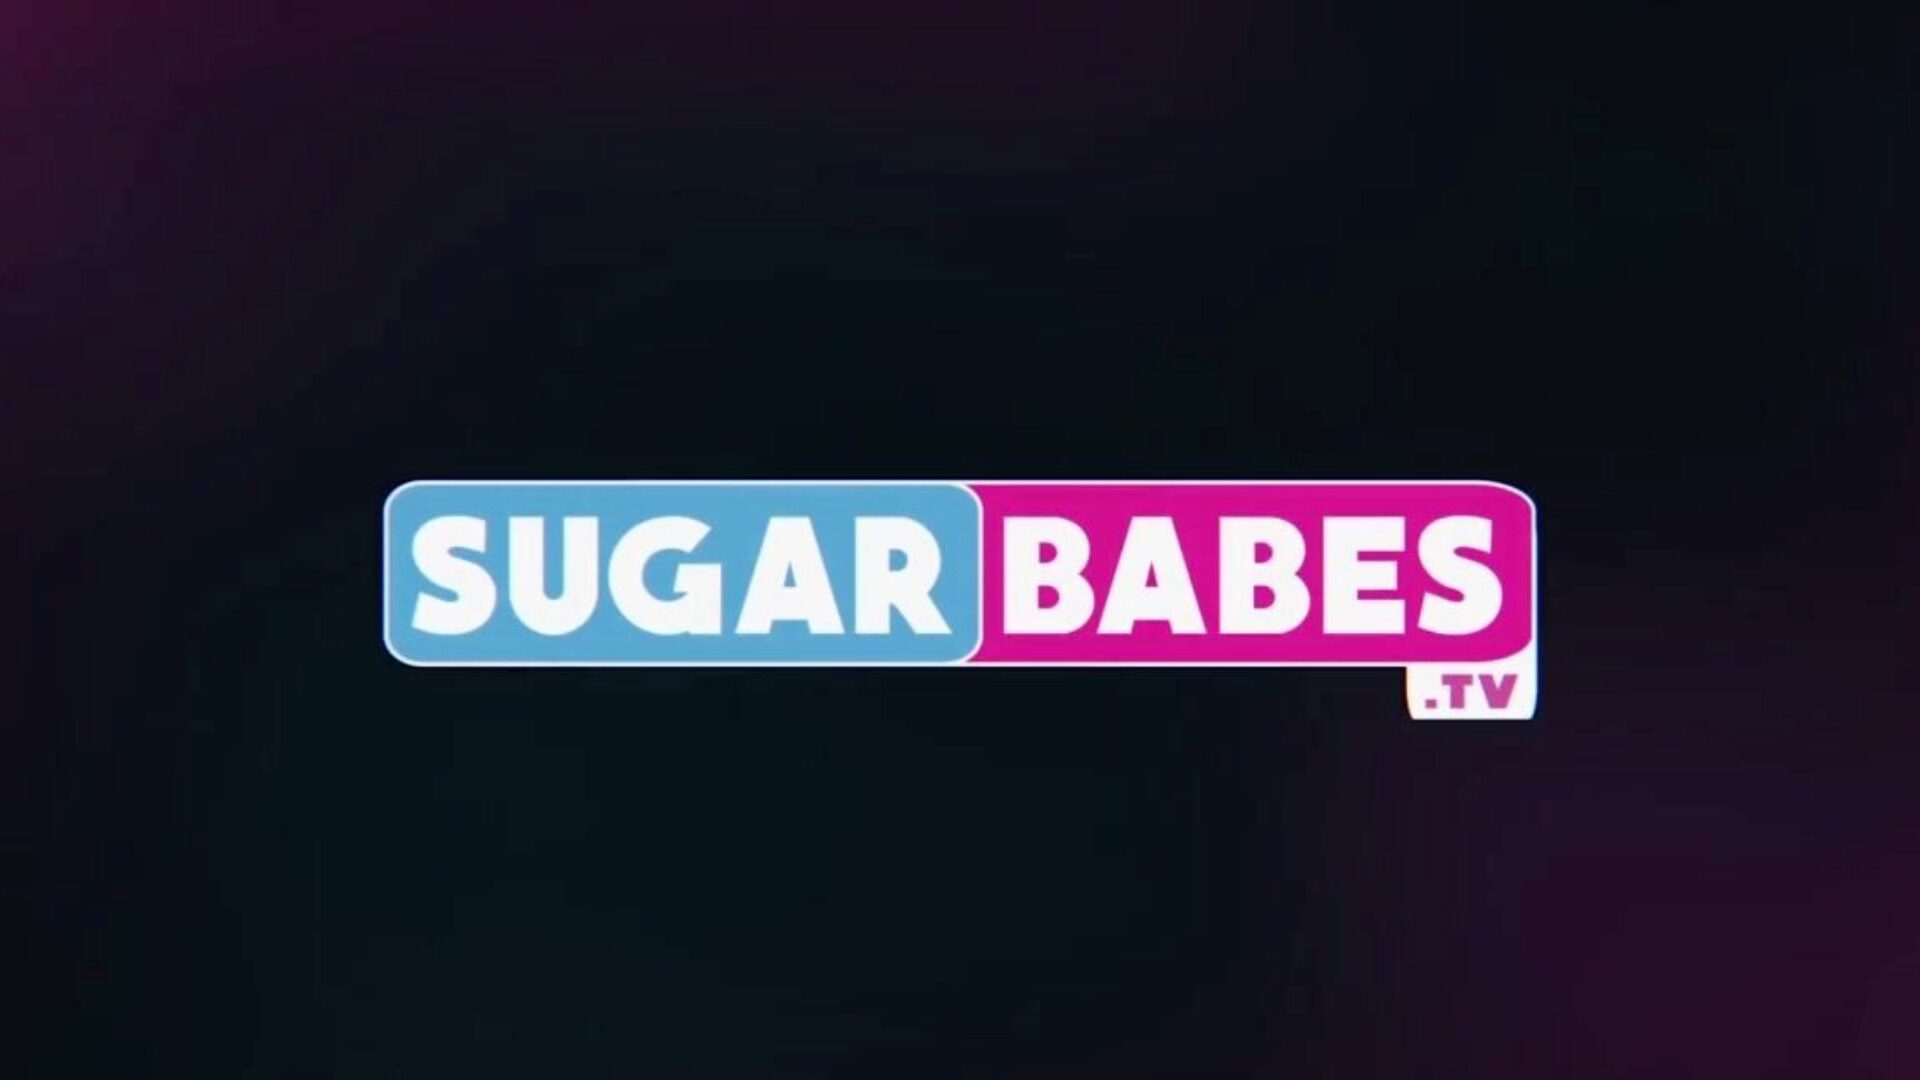 sugarbabestv the bottle, free sugar honeys tv hd porno 6b watch sugarbabestv the bottle video on xhamster, the best hd lovemaking tube web site with lots of free sugar babes tv lesbian sex & love pornography vids